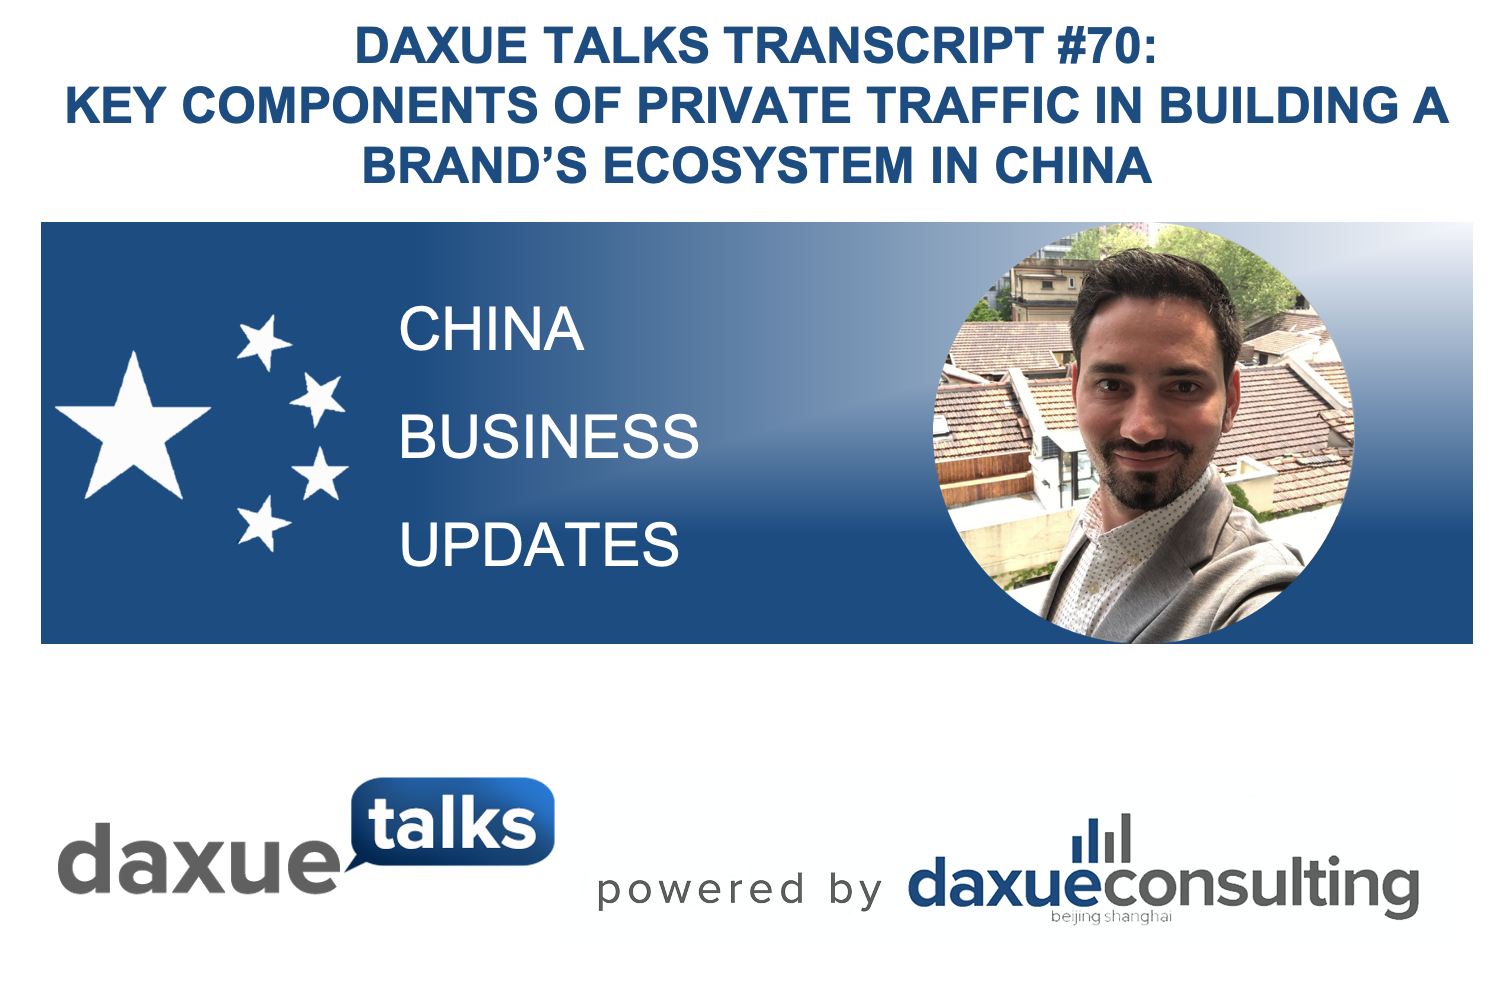 Daxue Talks transcript #70: Key components of private traffic in building a brand’s ecosystem in China